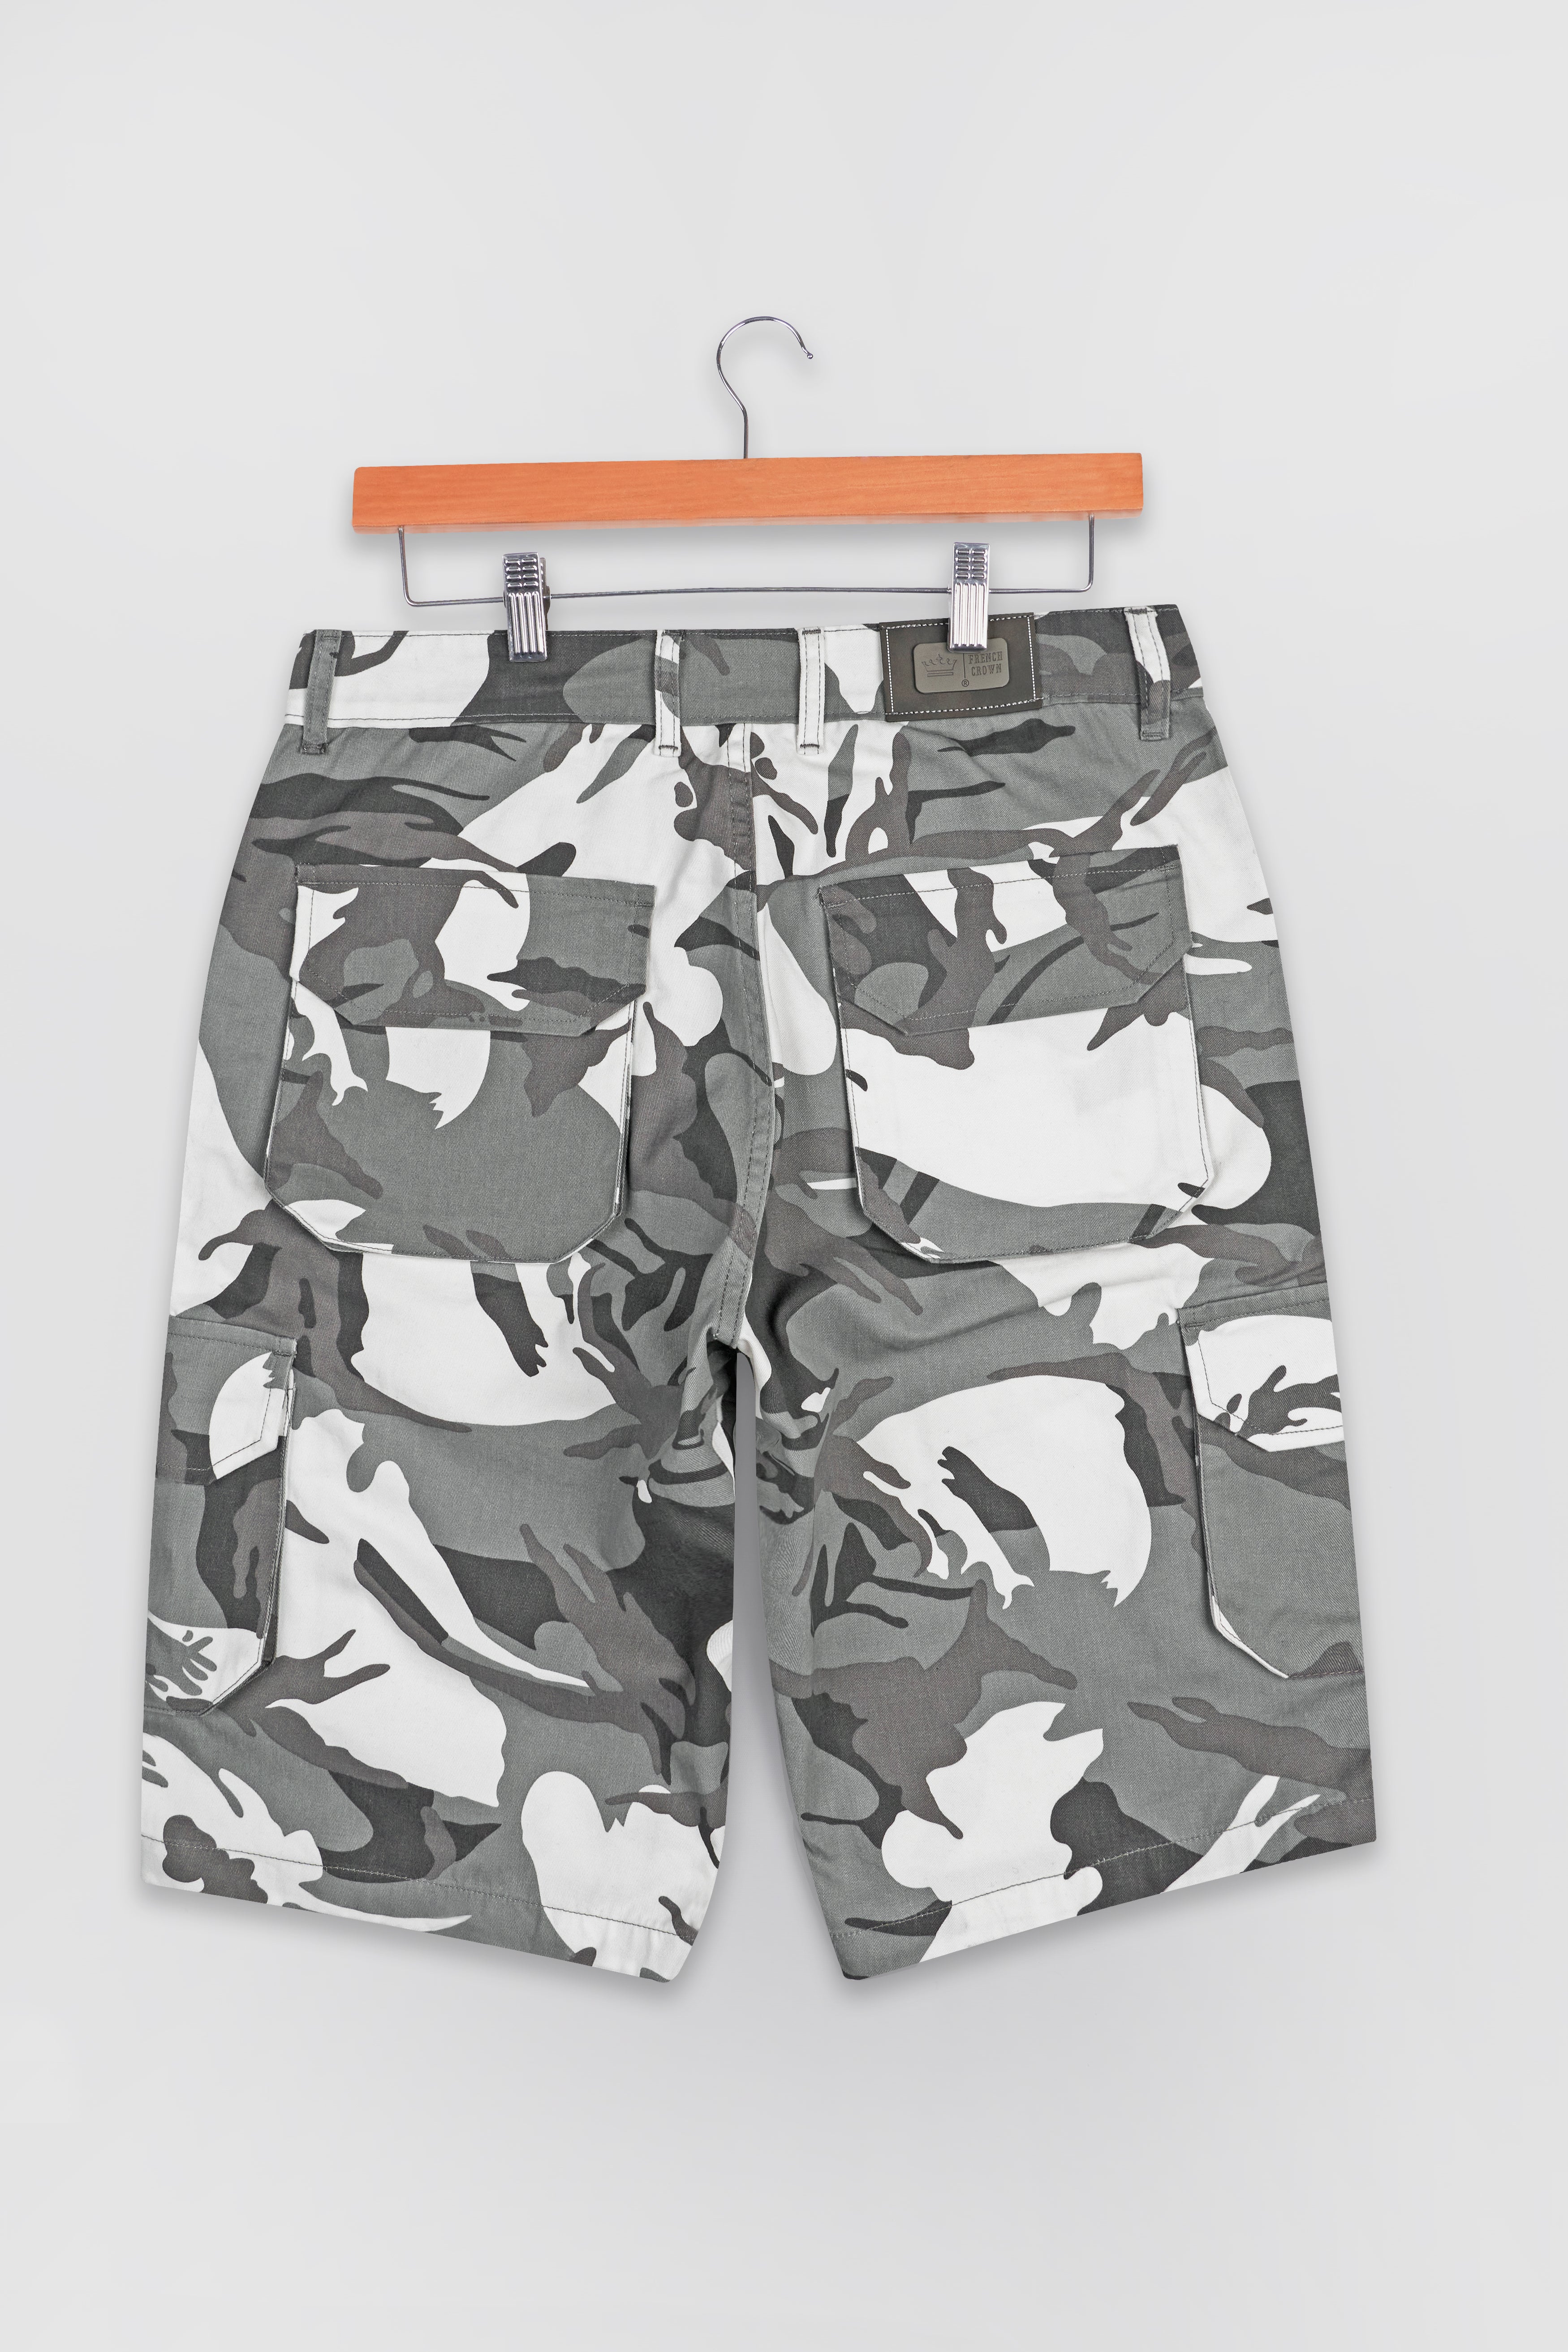 Storm Dust Gray with Tuatara Gray and White Camouflage Cargo Shorts SR281-28, SR281-30, SR281-32, SR281-34, SR281-36, SR281-38, SR281-40, SR281-42, SR281-44